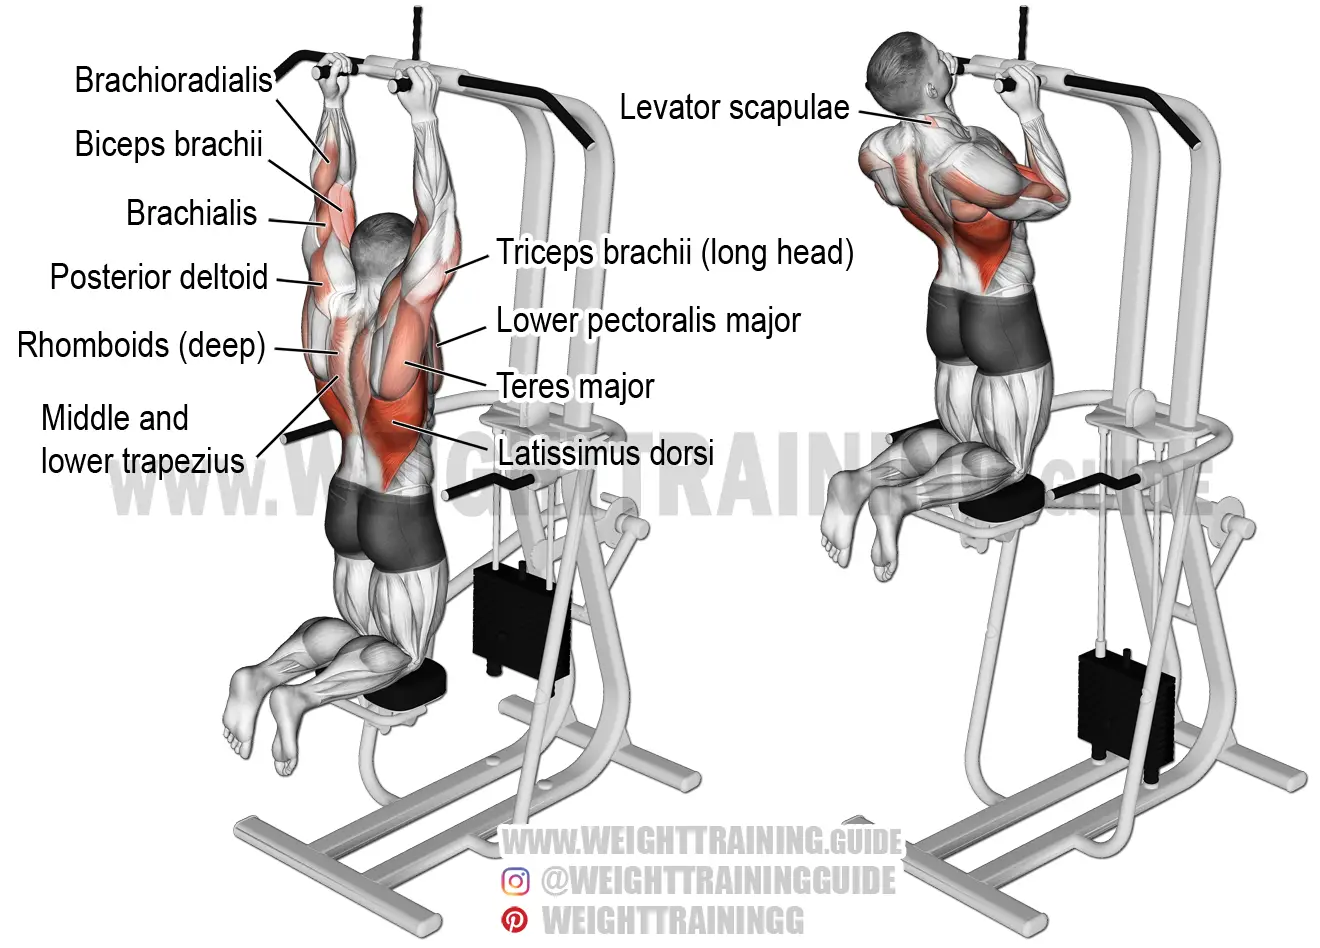 Machine-assisted close neutral-grip pull-up exercise instructions and video